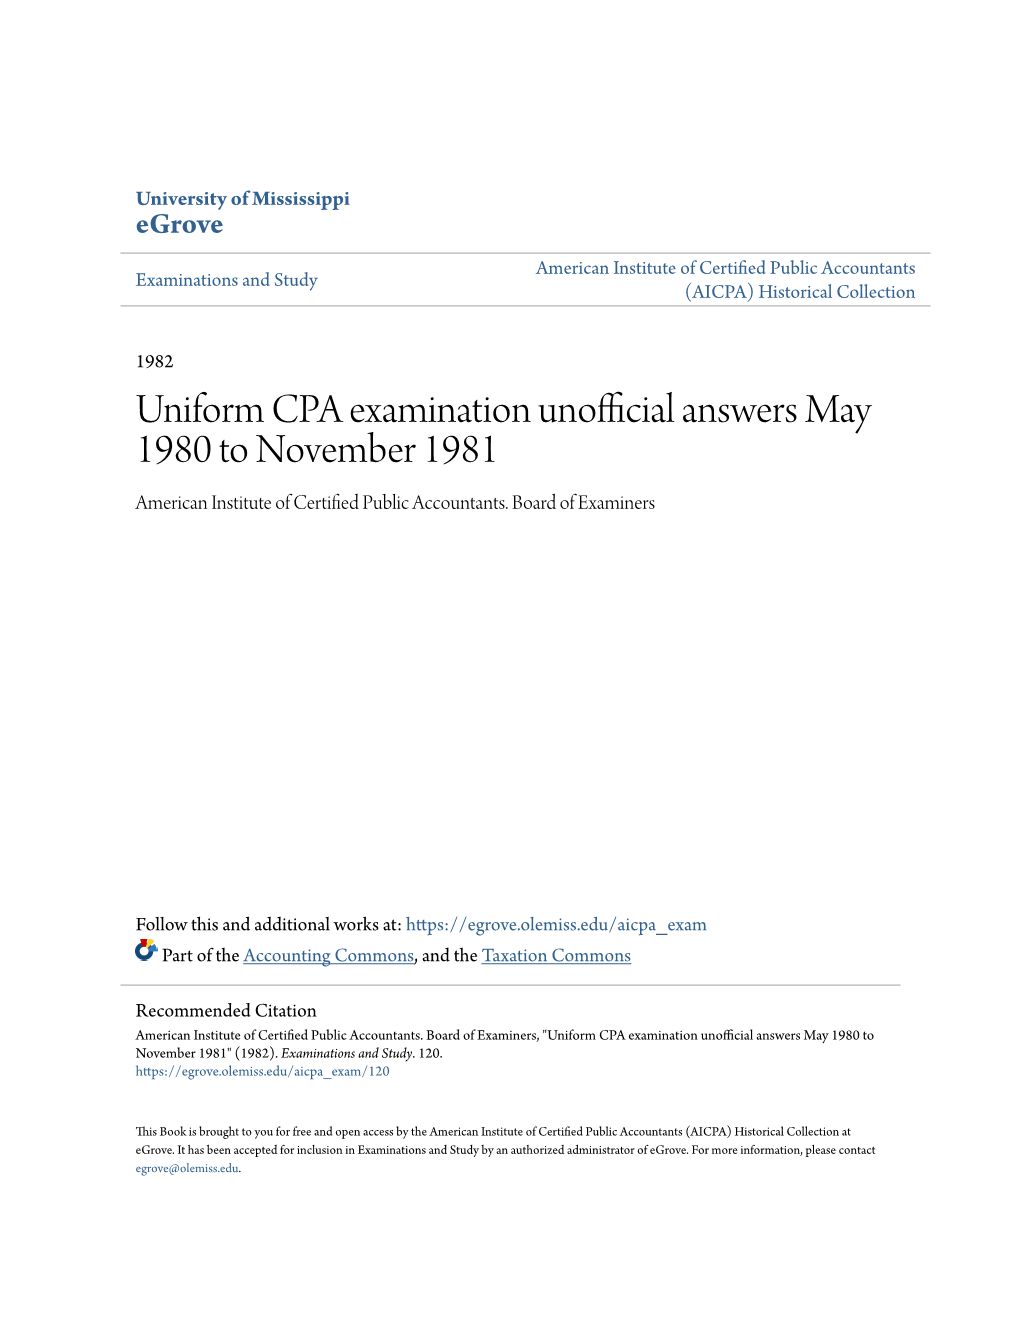 Uniform CPA Examination Unofficial Answers May 1980 to November 1981 American Institute of Certified Public Accountants